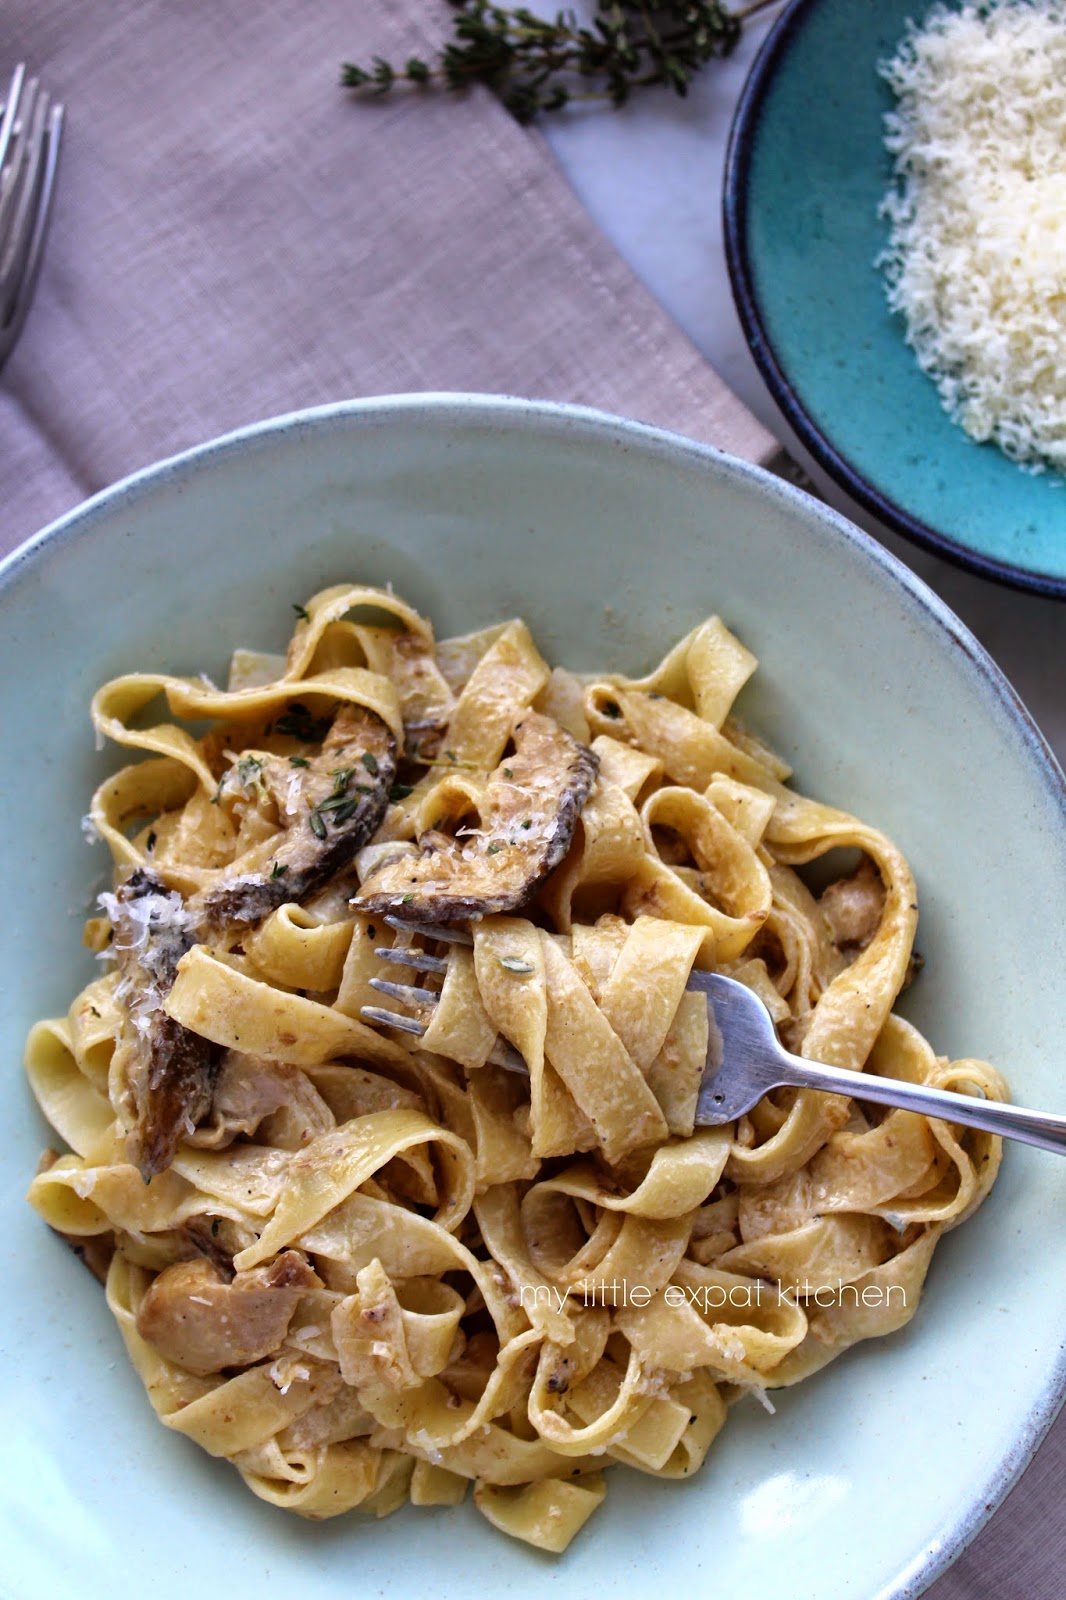 My Little Expat Kitchen: Fettuccine with fresh porcini mushrooms and